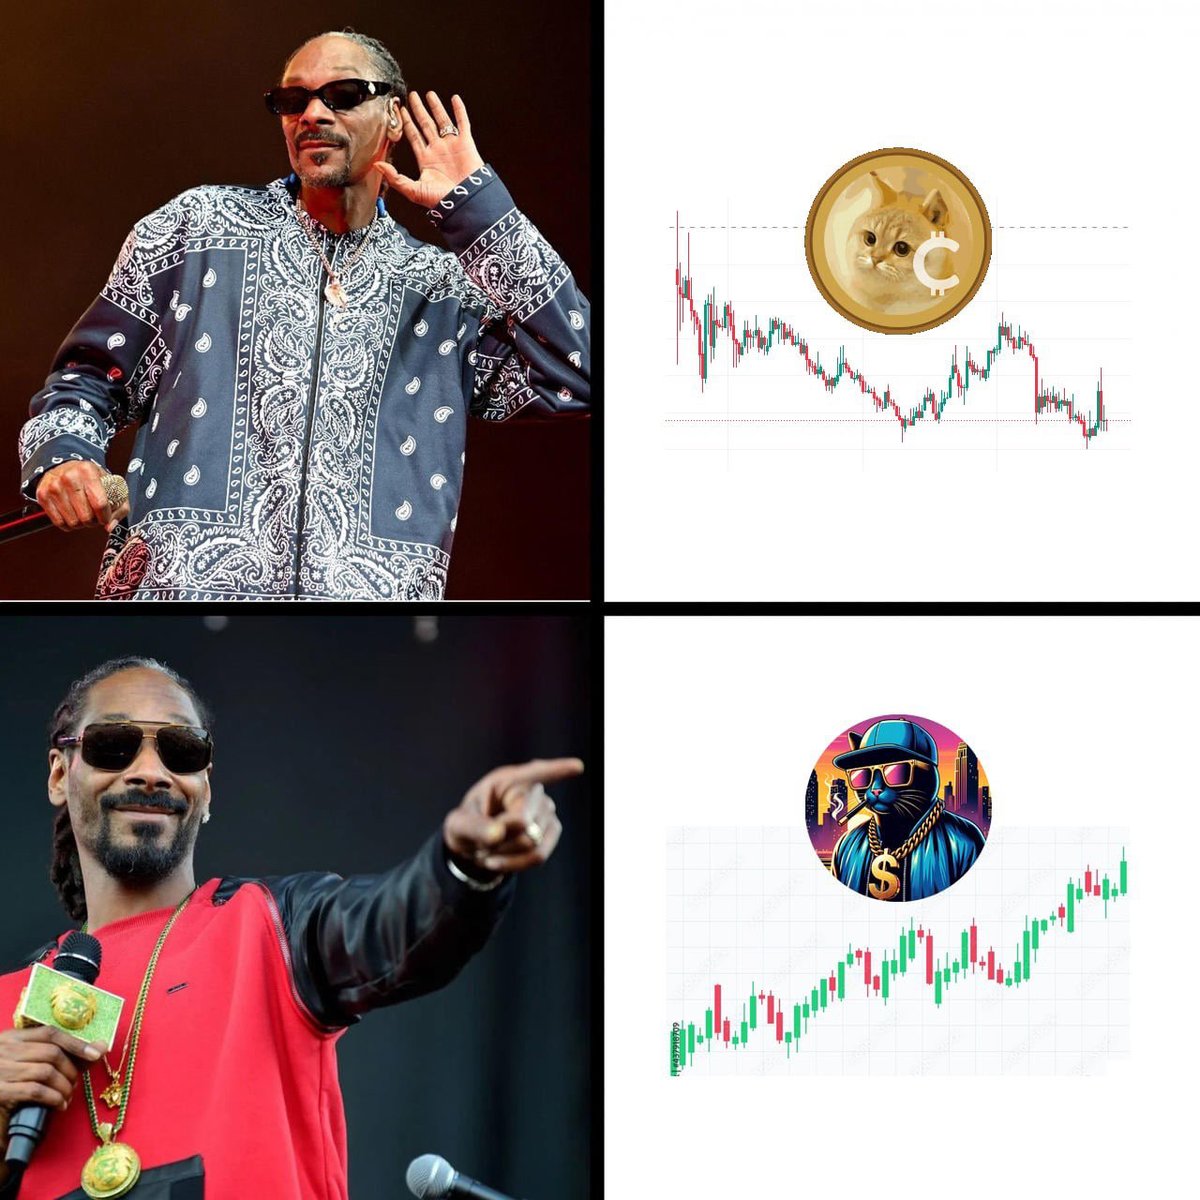 🐱Inspired by the legendary Snoop Dogg but forged in the crucible of the underworld,
🐱 Website: snoopcats.org
🐱 Twitter: twitter.com/snoopcattoken
#snoopcat #memecoin #BSC 
9OXY3S

#cryptowallet #cryptoart #pennystocks #nftartwork #cryptocurrencyexchange